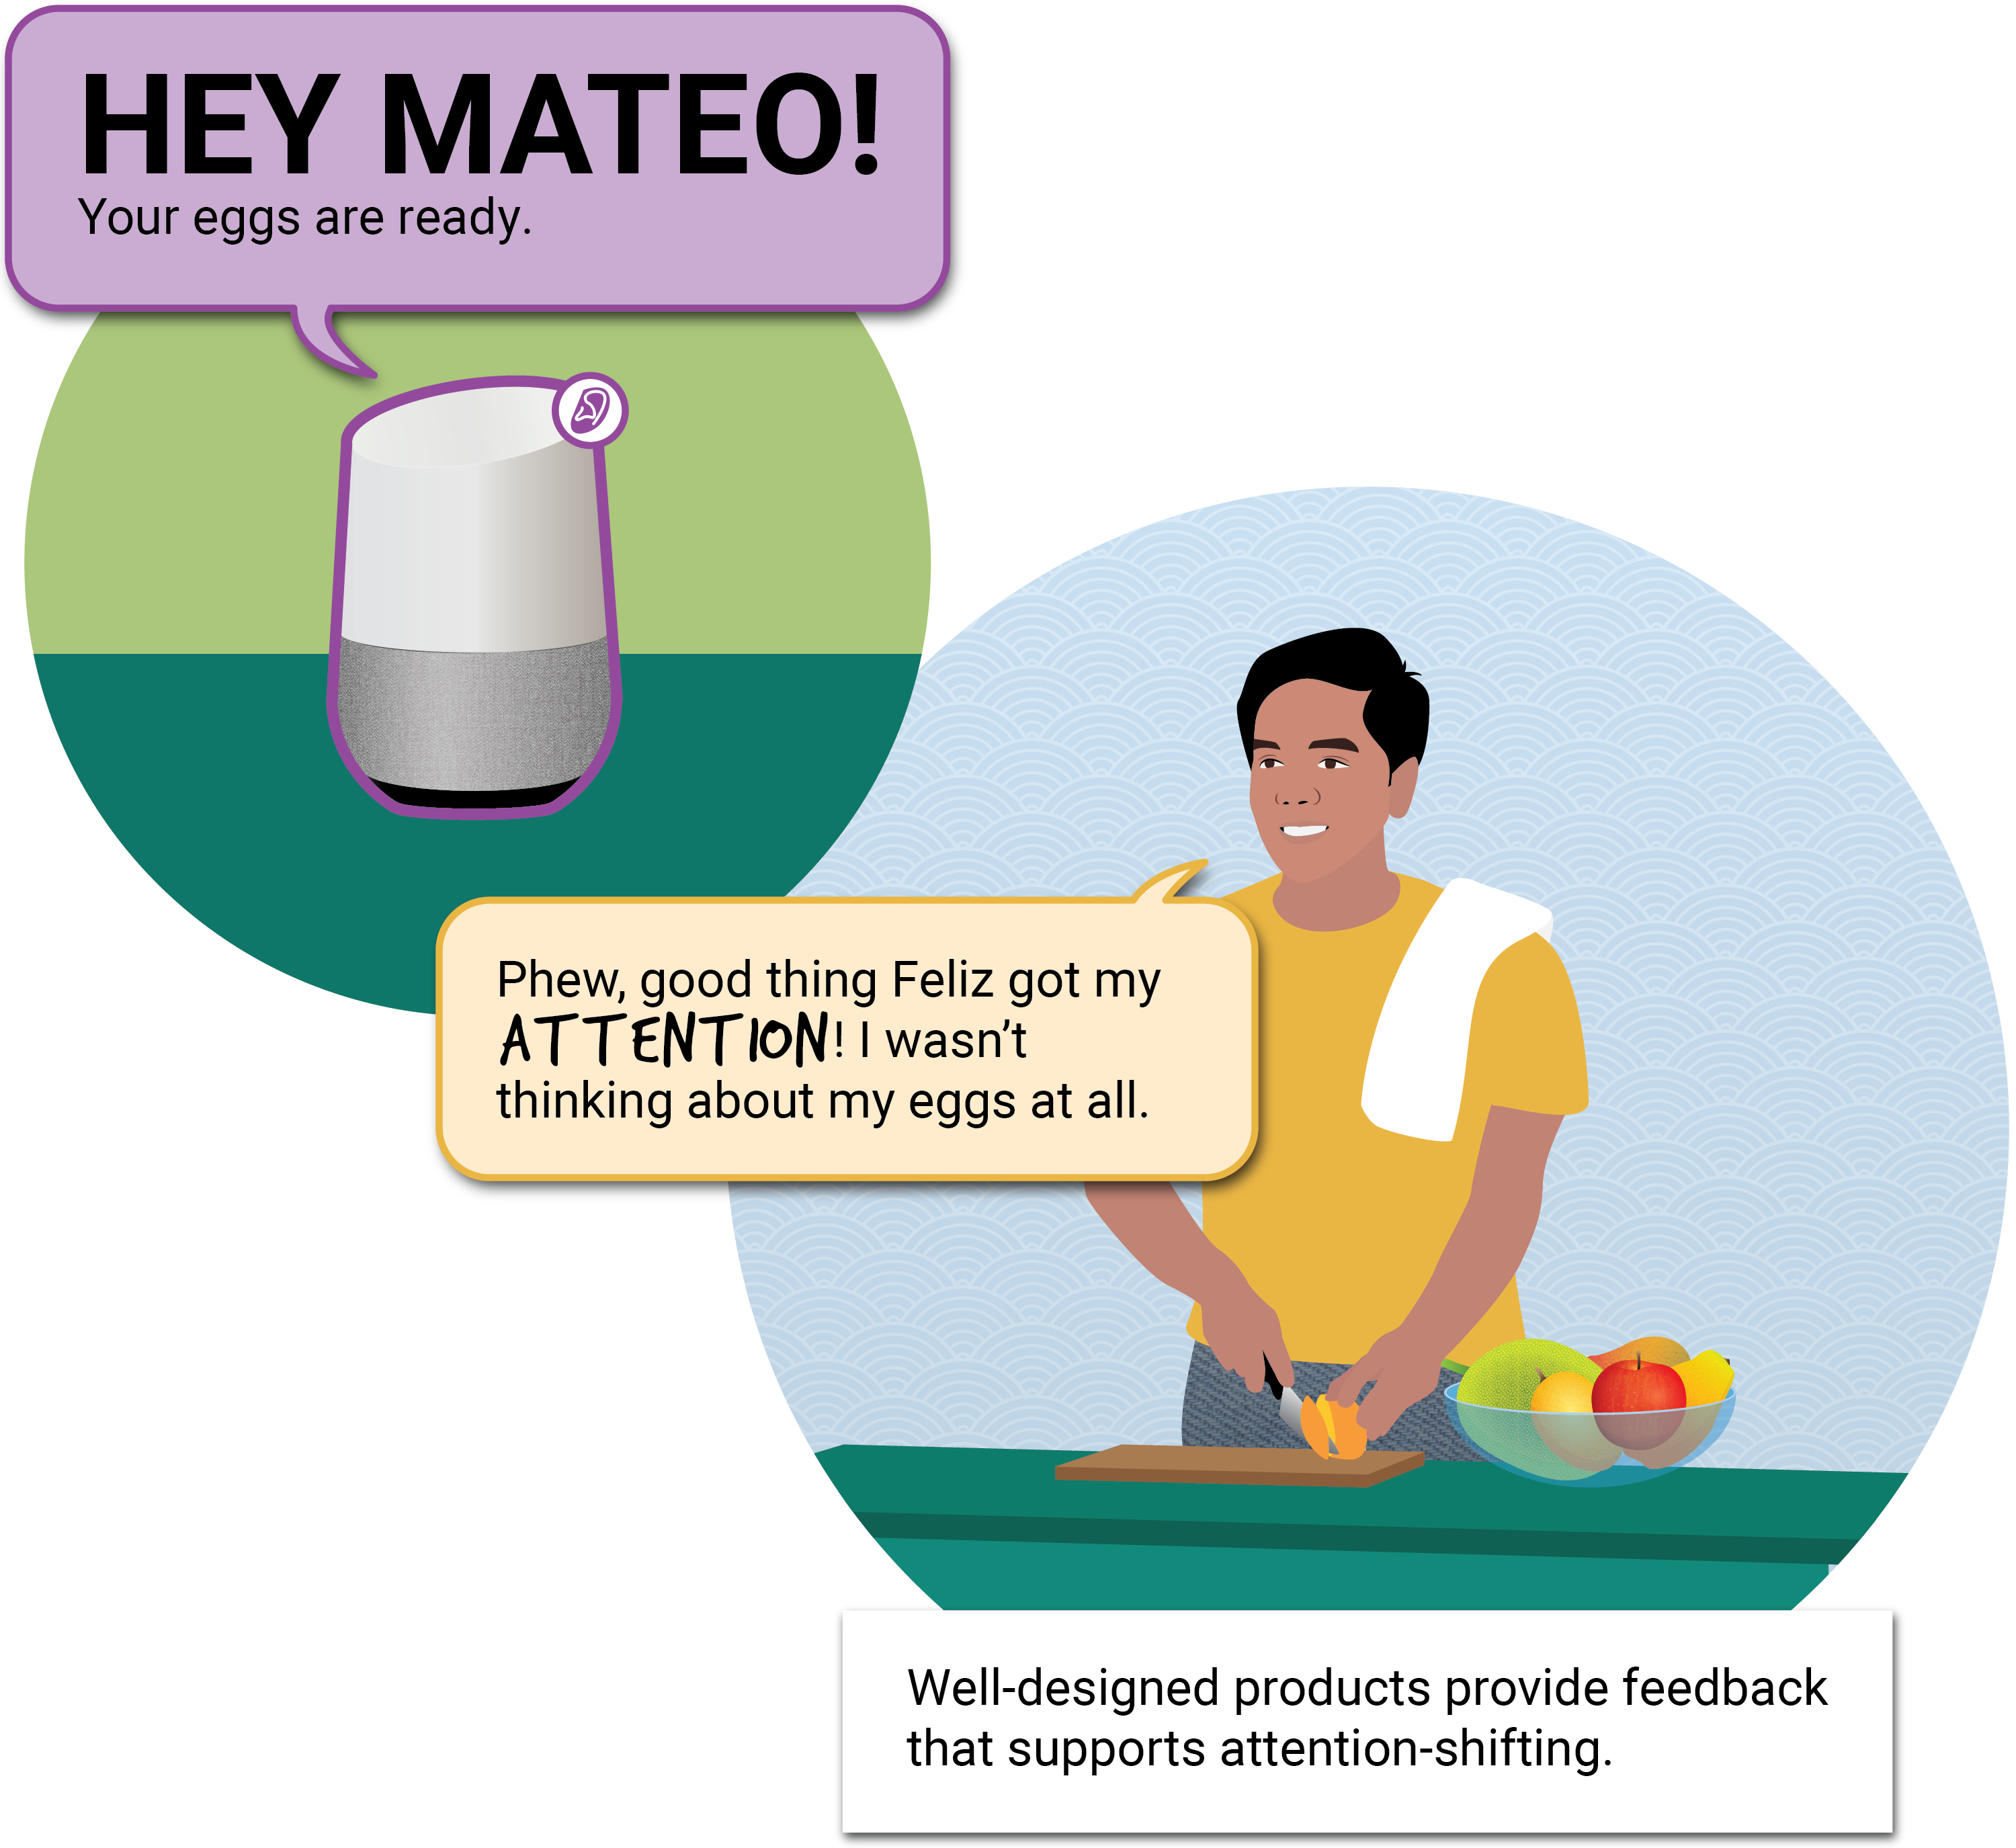 The smart home device yells, HEY MATEO! Your eggs are ready. Mateo is chopping a mango and says, Phew, good thing Feliz got my attention! I wasn’t thinking about my eggs at all. Caption says, Well-designed products provide feedback that supports attention-shifting.